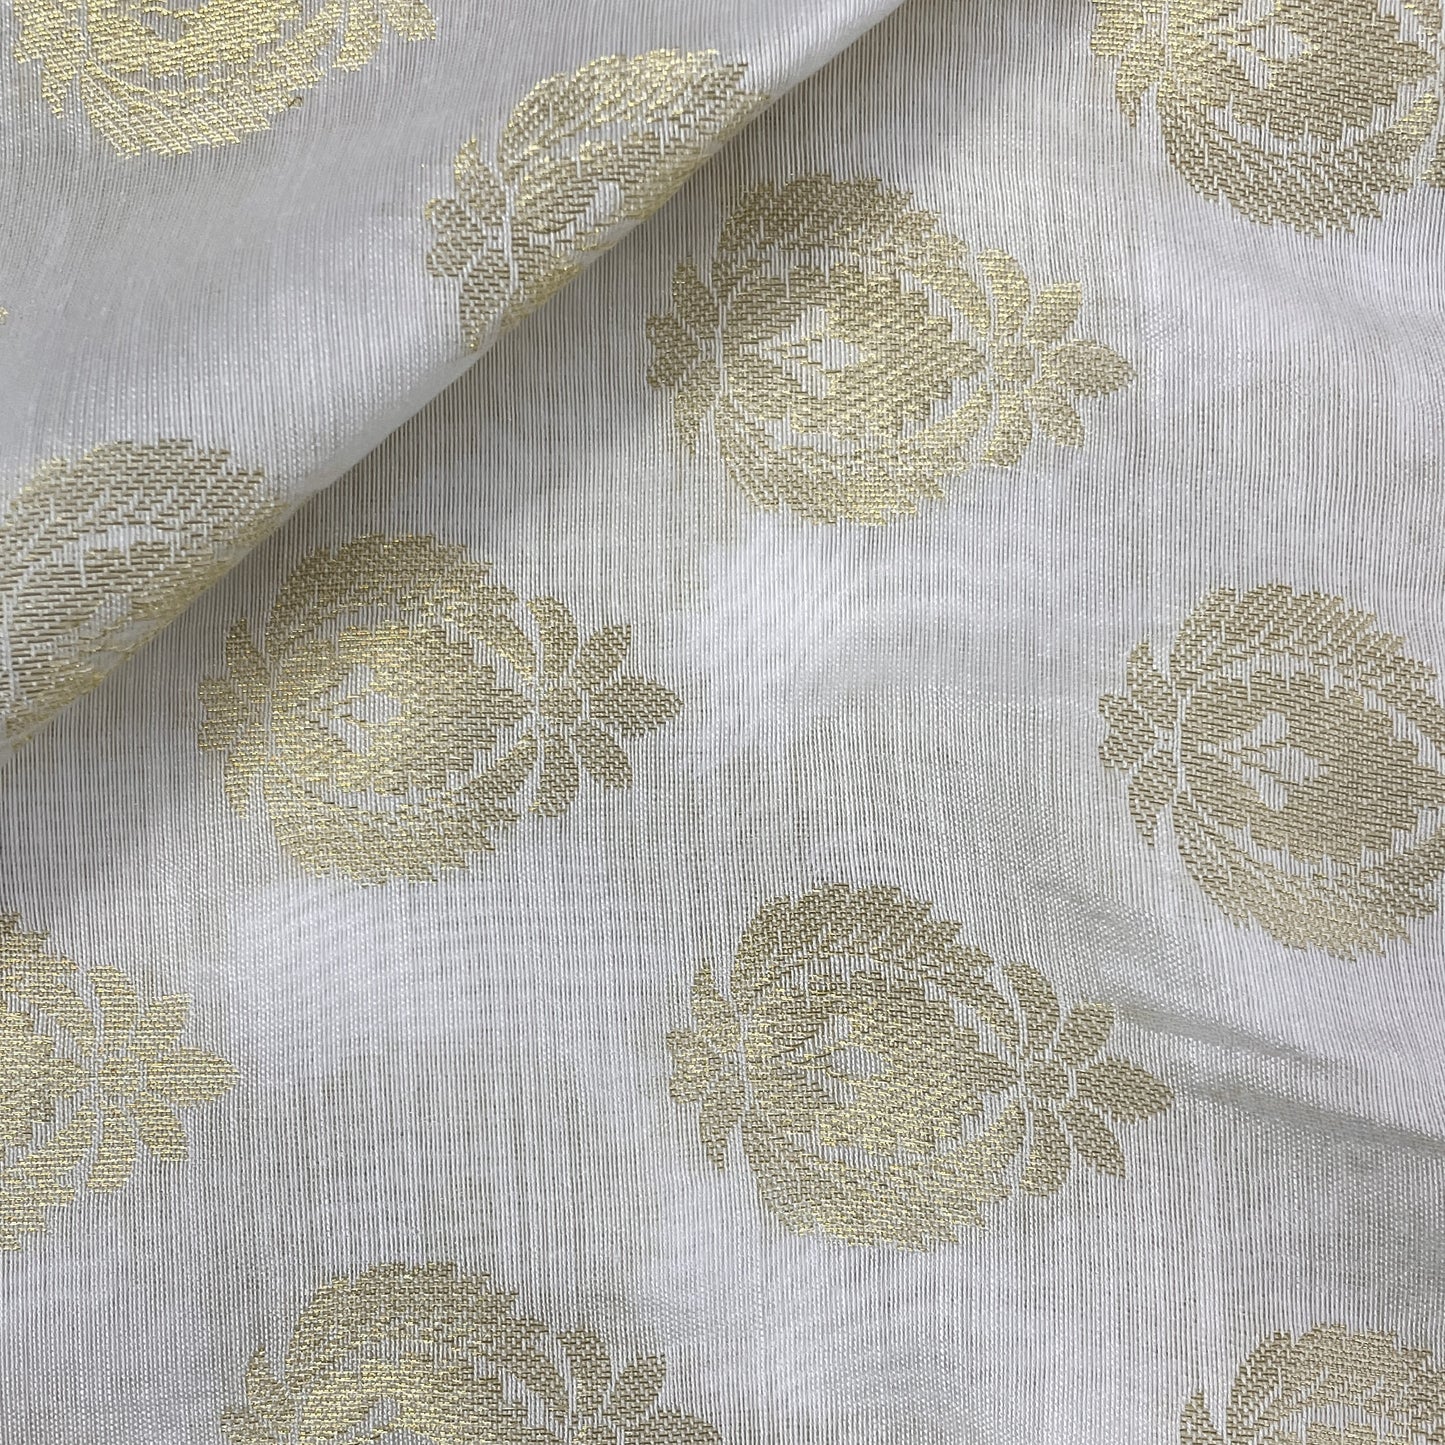 Classic White Gold Traditional Buta Jacquard Dyeable Cotton Staple Fabric